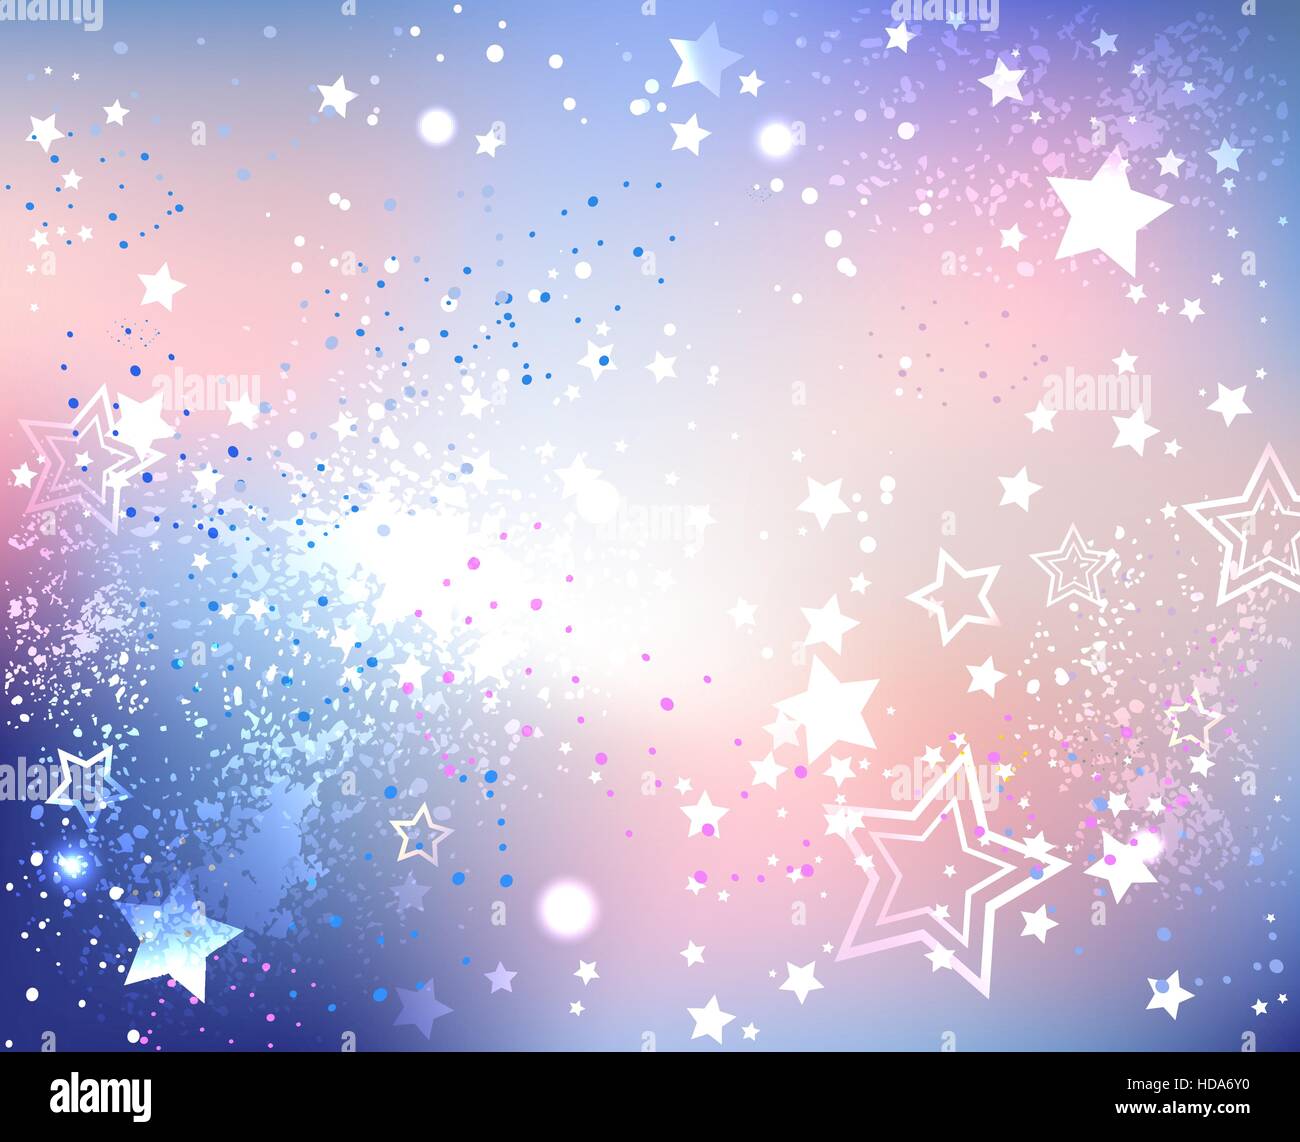 iridescent textured background fashionable colors of pink quartz and serenity with sparkles and stars. Stock Vector